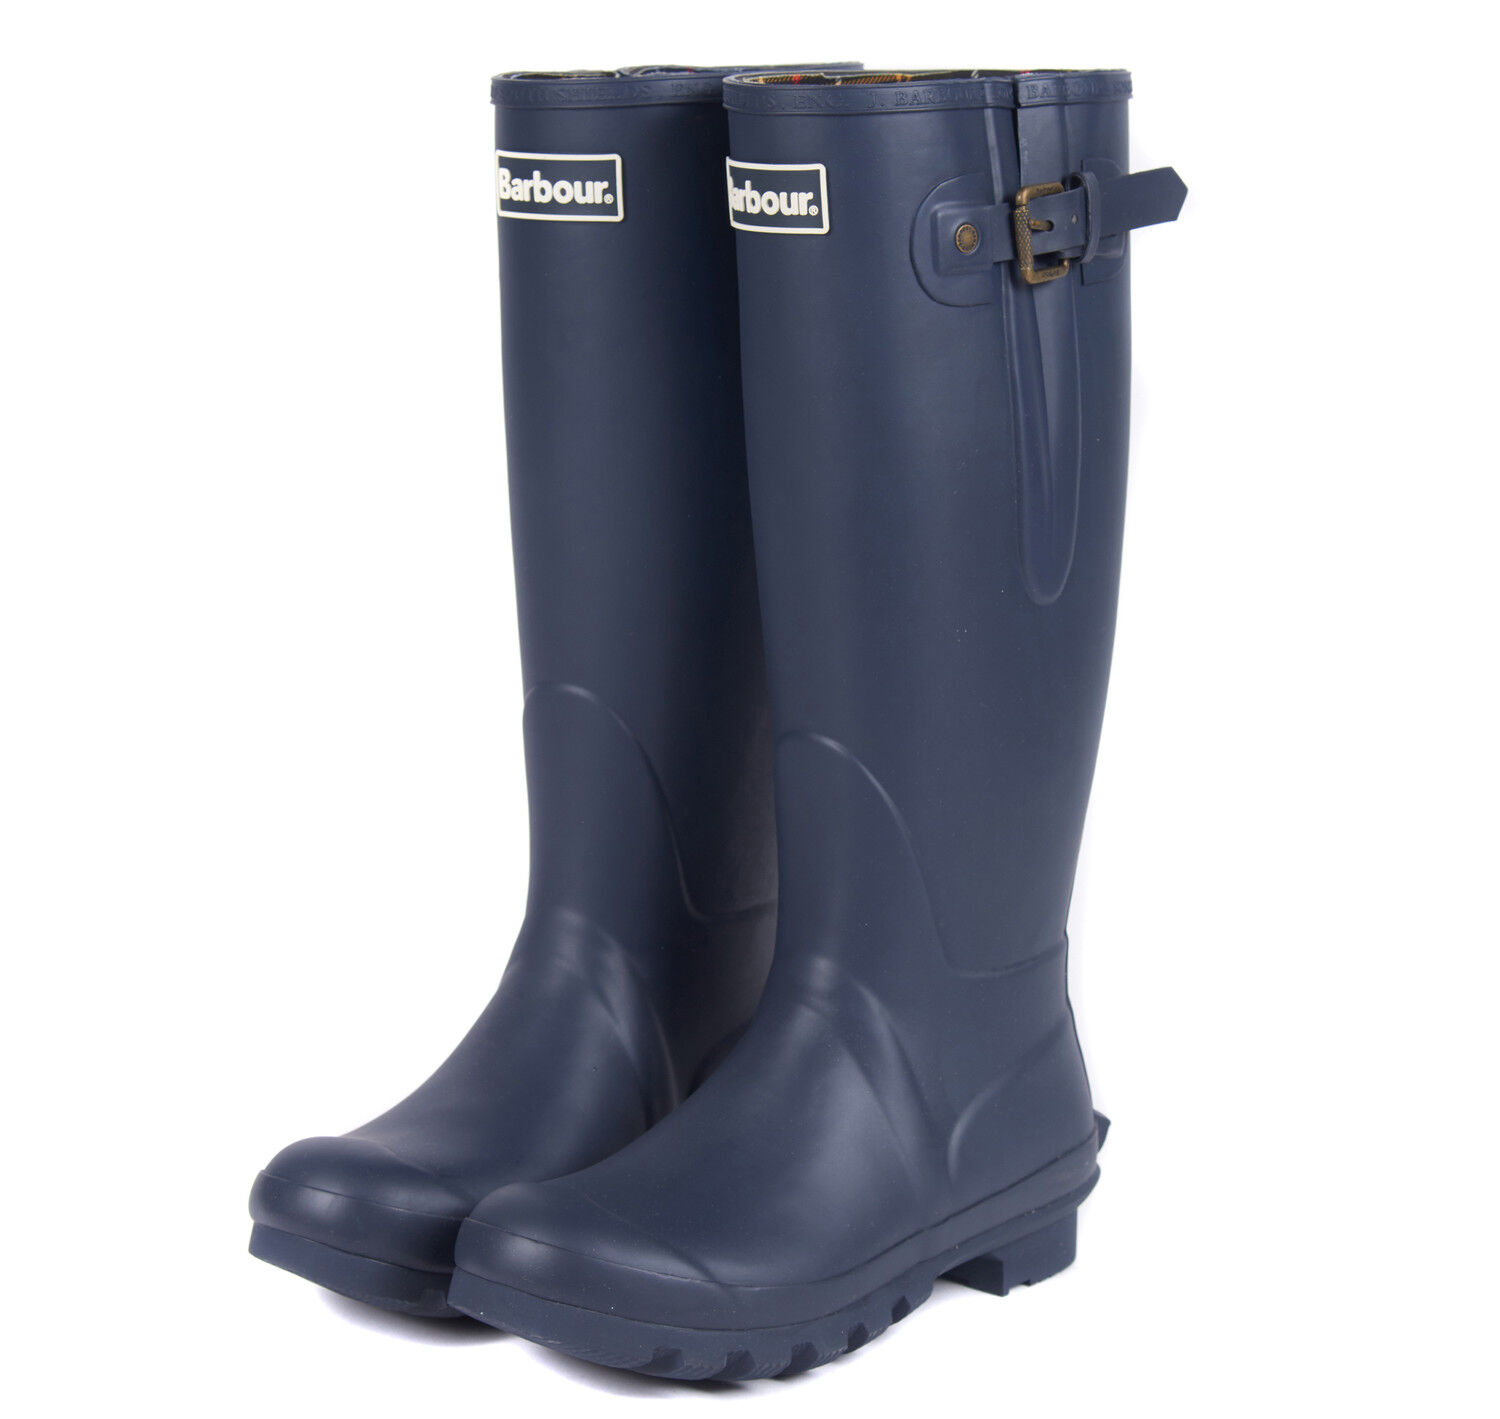 barbour wellies size 4